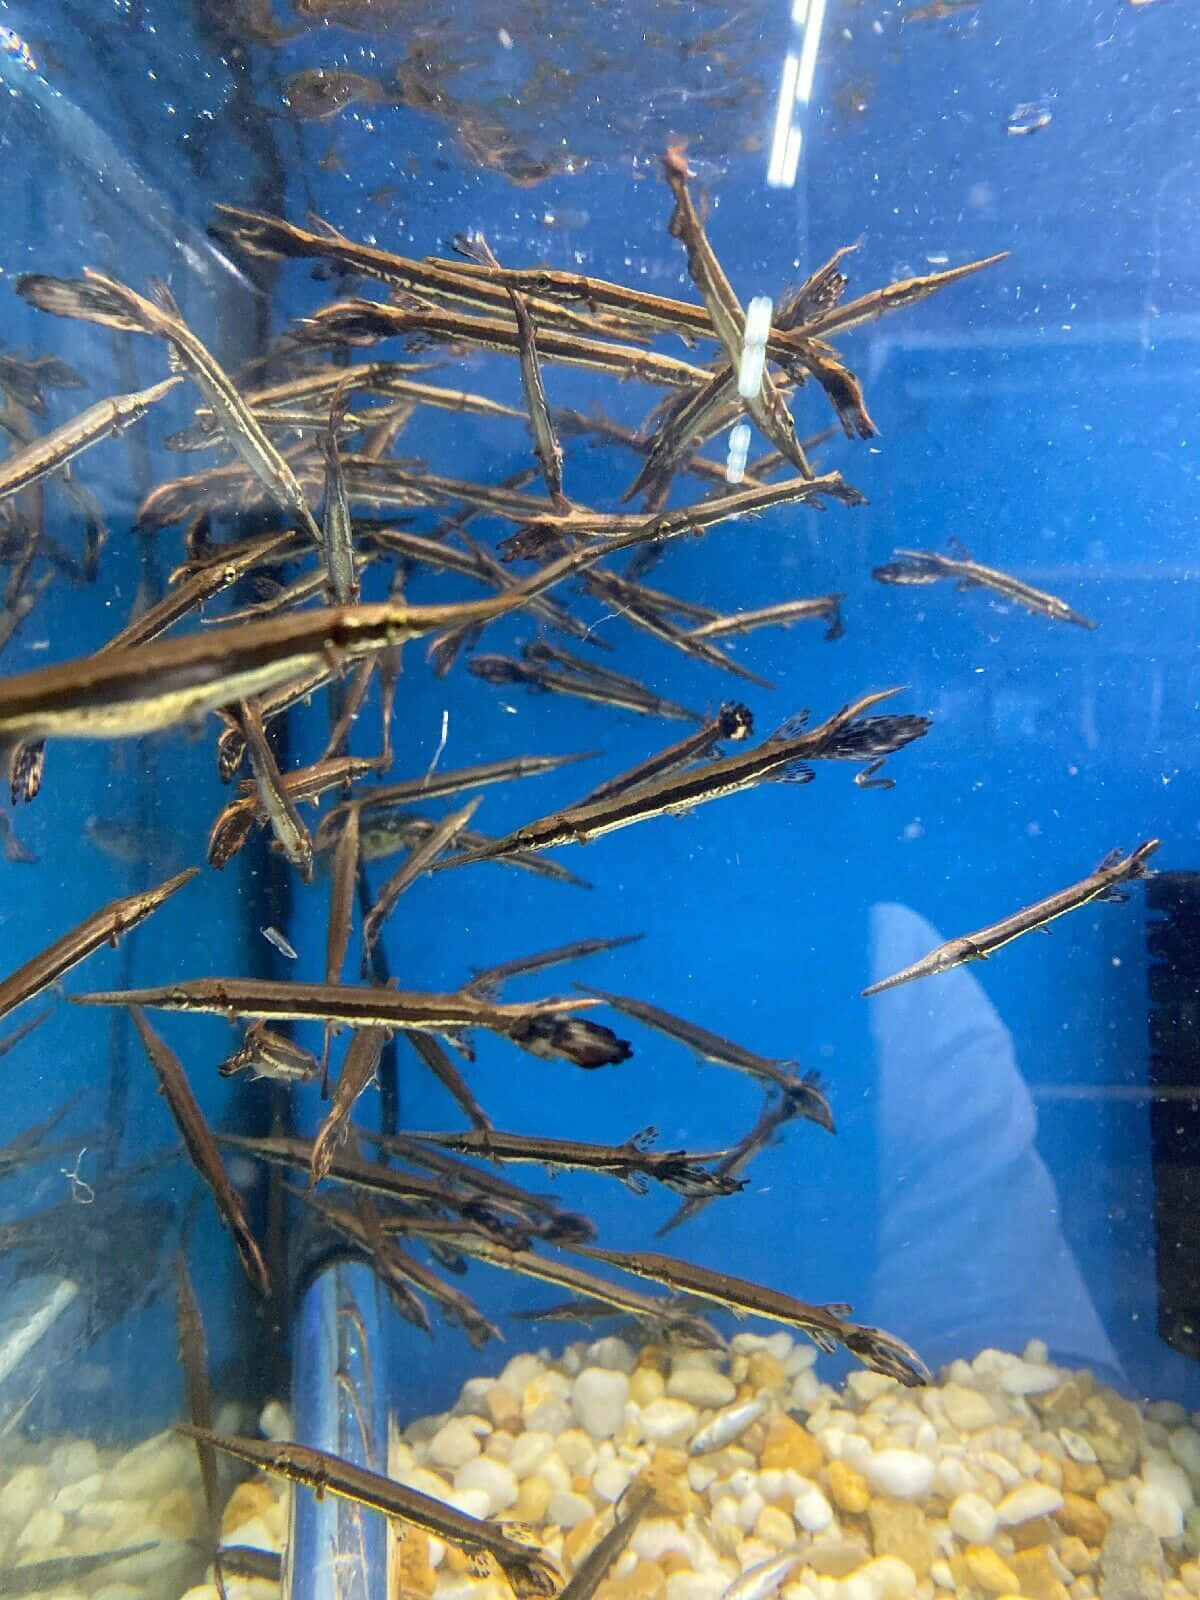 A Group Of Fish In An Aquarium With Rocks